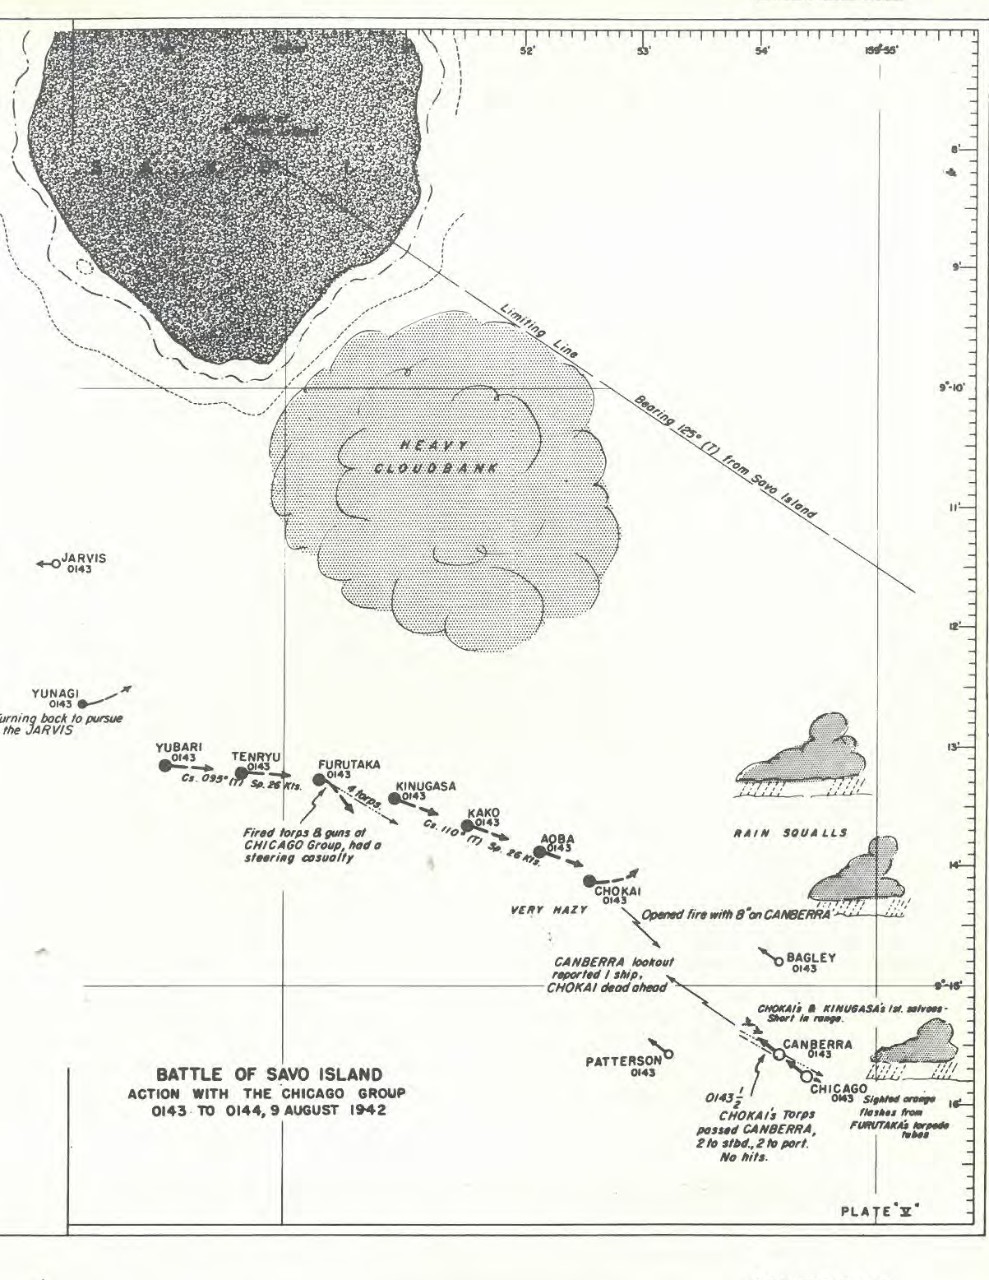 A chart shows the movements of the opposing ships as the Japanese attack the Southern Group during the Battle of Savo Island, 0143–0144 on 9 August 1942. Not all of the ships are plotted correctly but the chart provides a glimpse of the chaos as ...